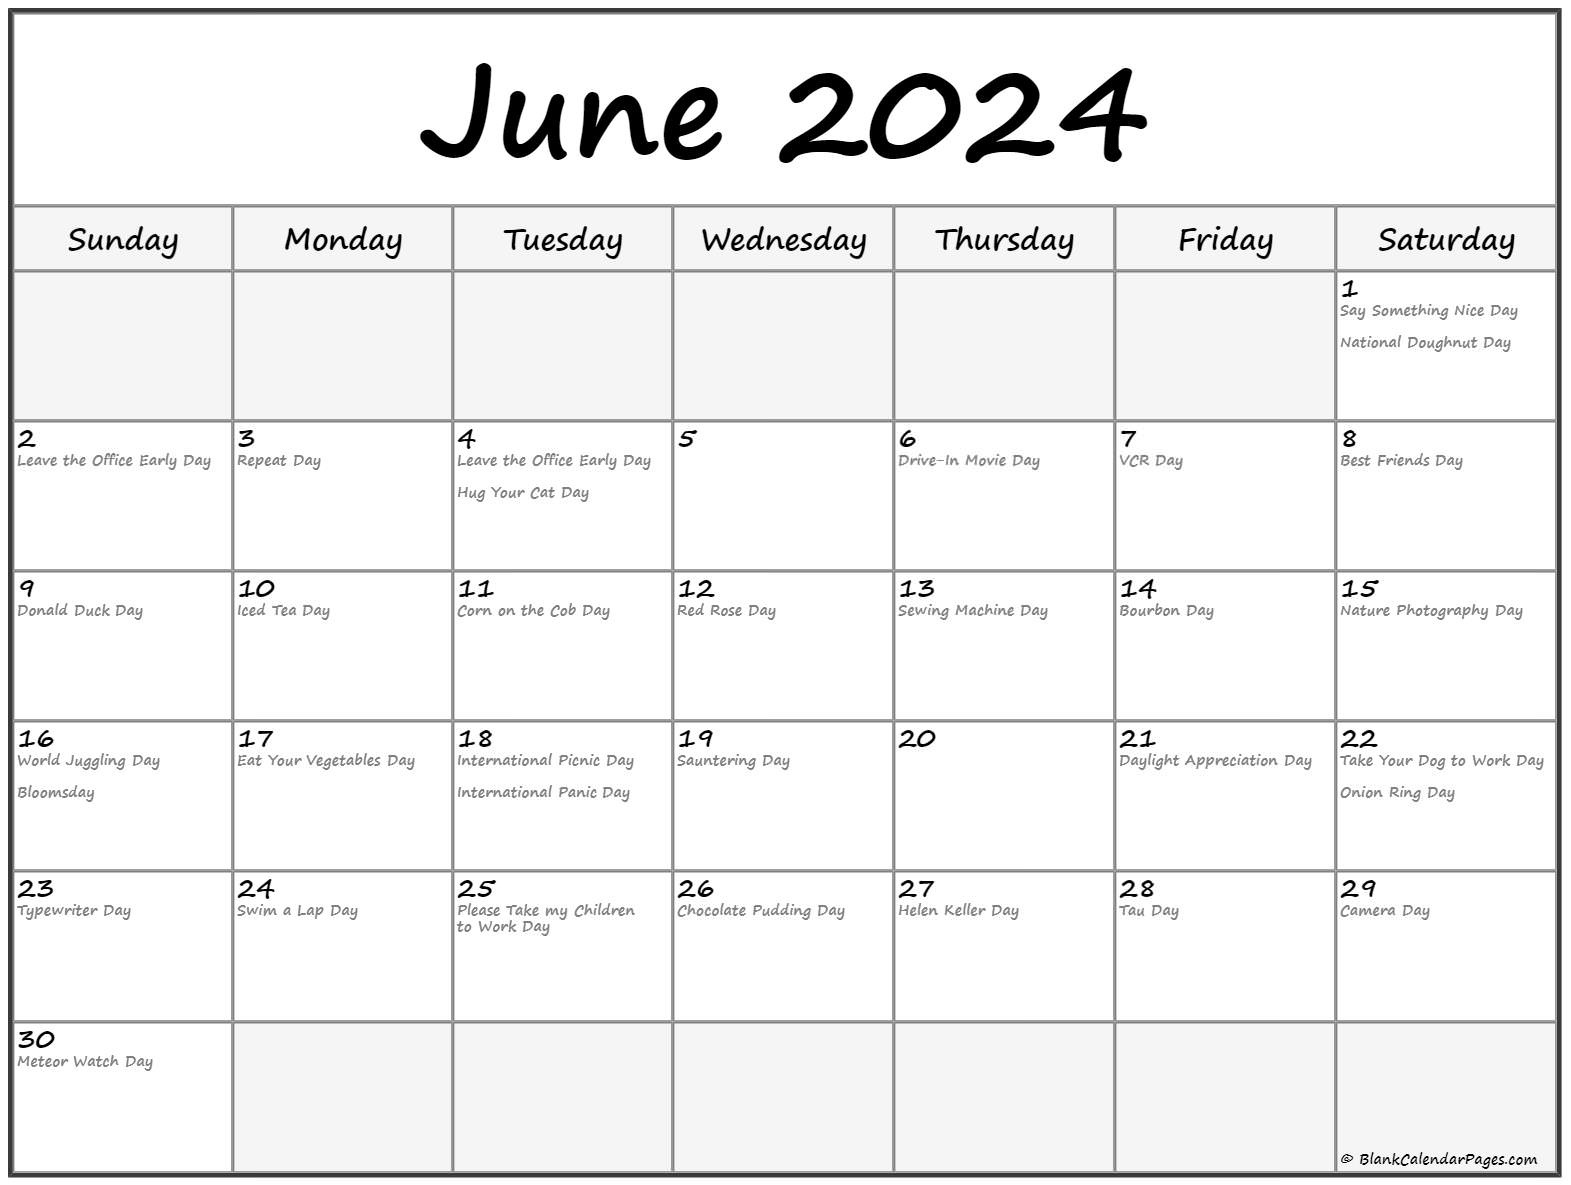 June 2024 With Holidays Calendar for National Day Calendar For June 2024